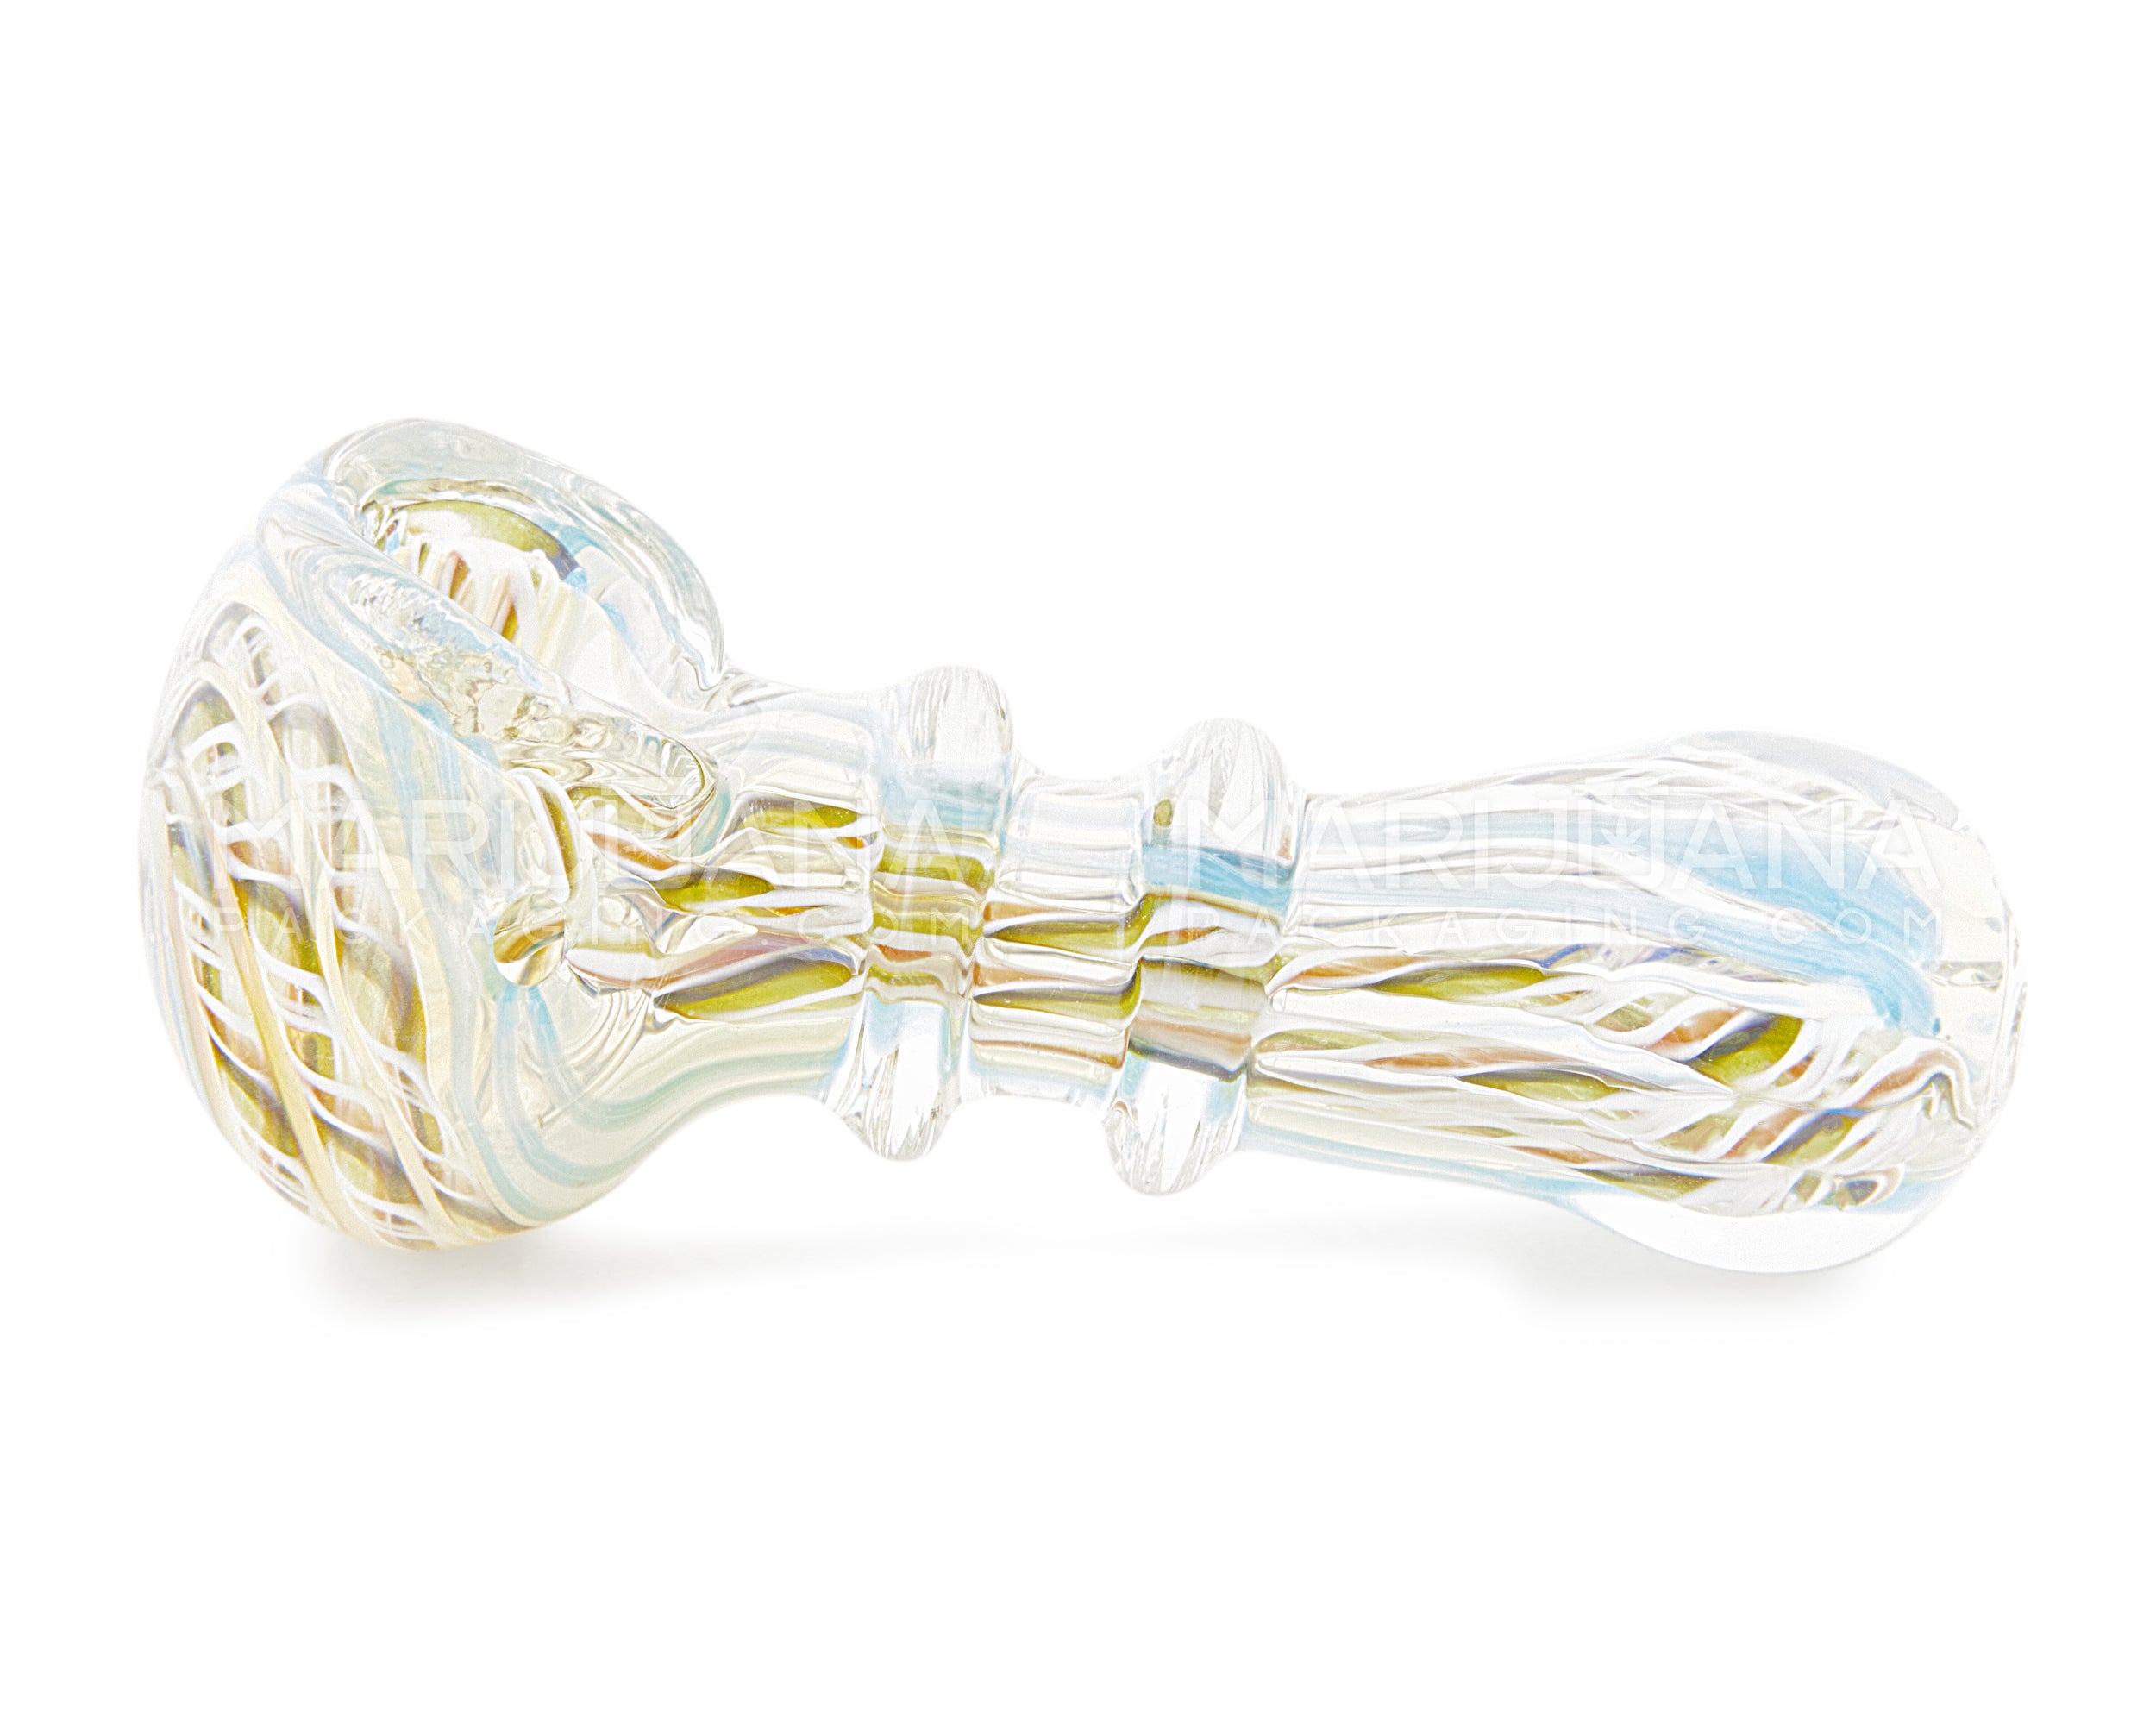 Ribboned Ringed Peanut Spoon Hand Pipe | 3in Long - Glass - Assorted